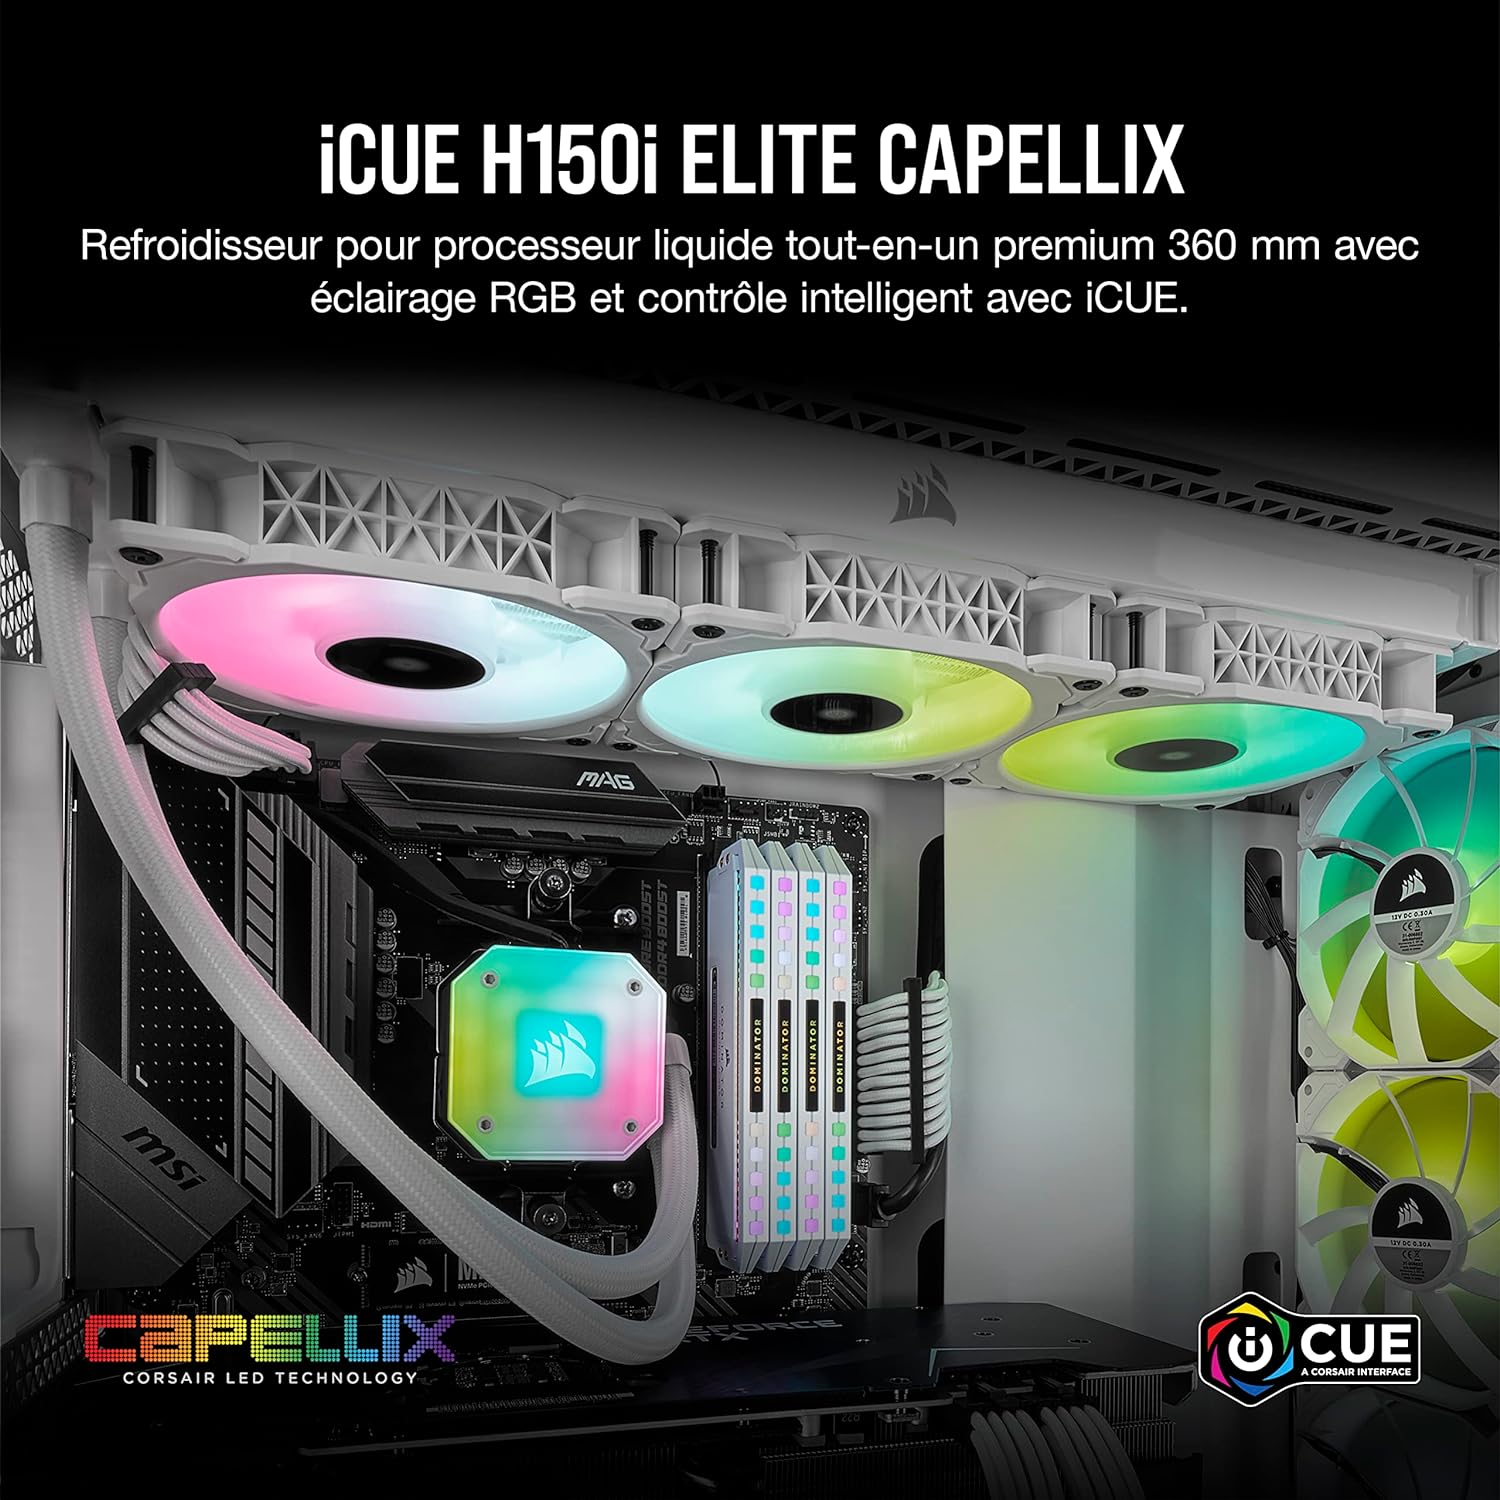 High-Performance Corsair iCUE H150i Elite Capellix White - Smart RGB controller for precise fan speed and lighting control. 0840006630616